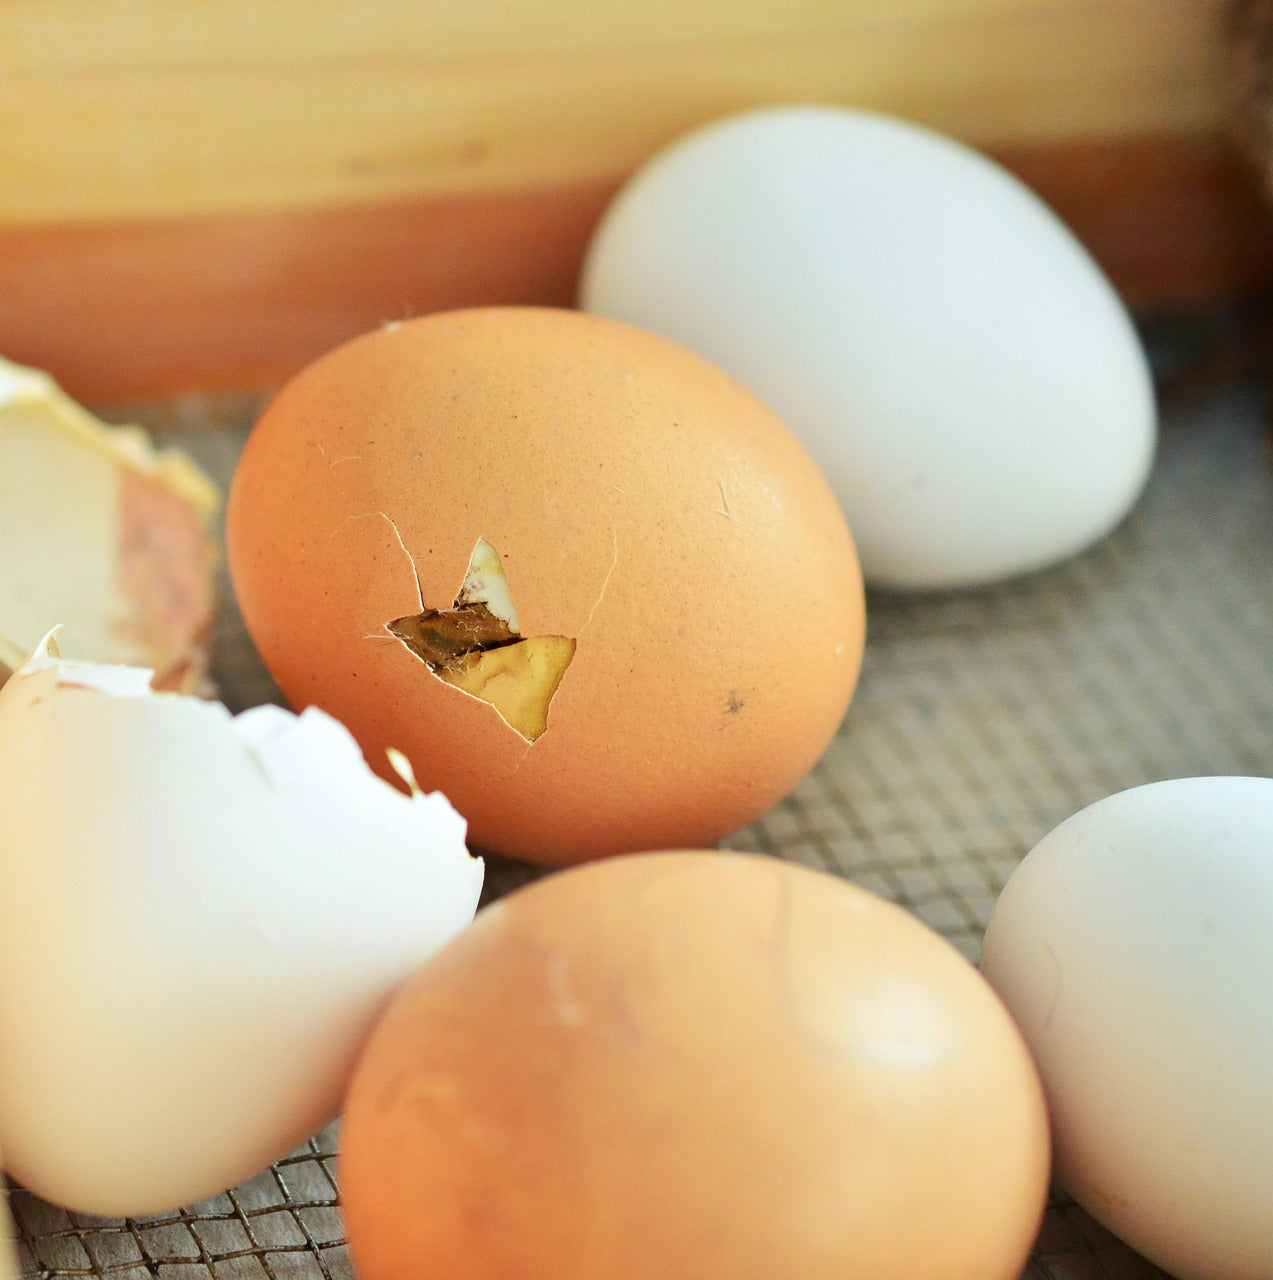 eggs hatching chicks treats for chickens congerdesign from Pixabay 